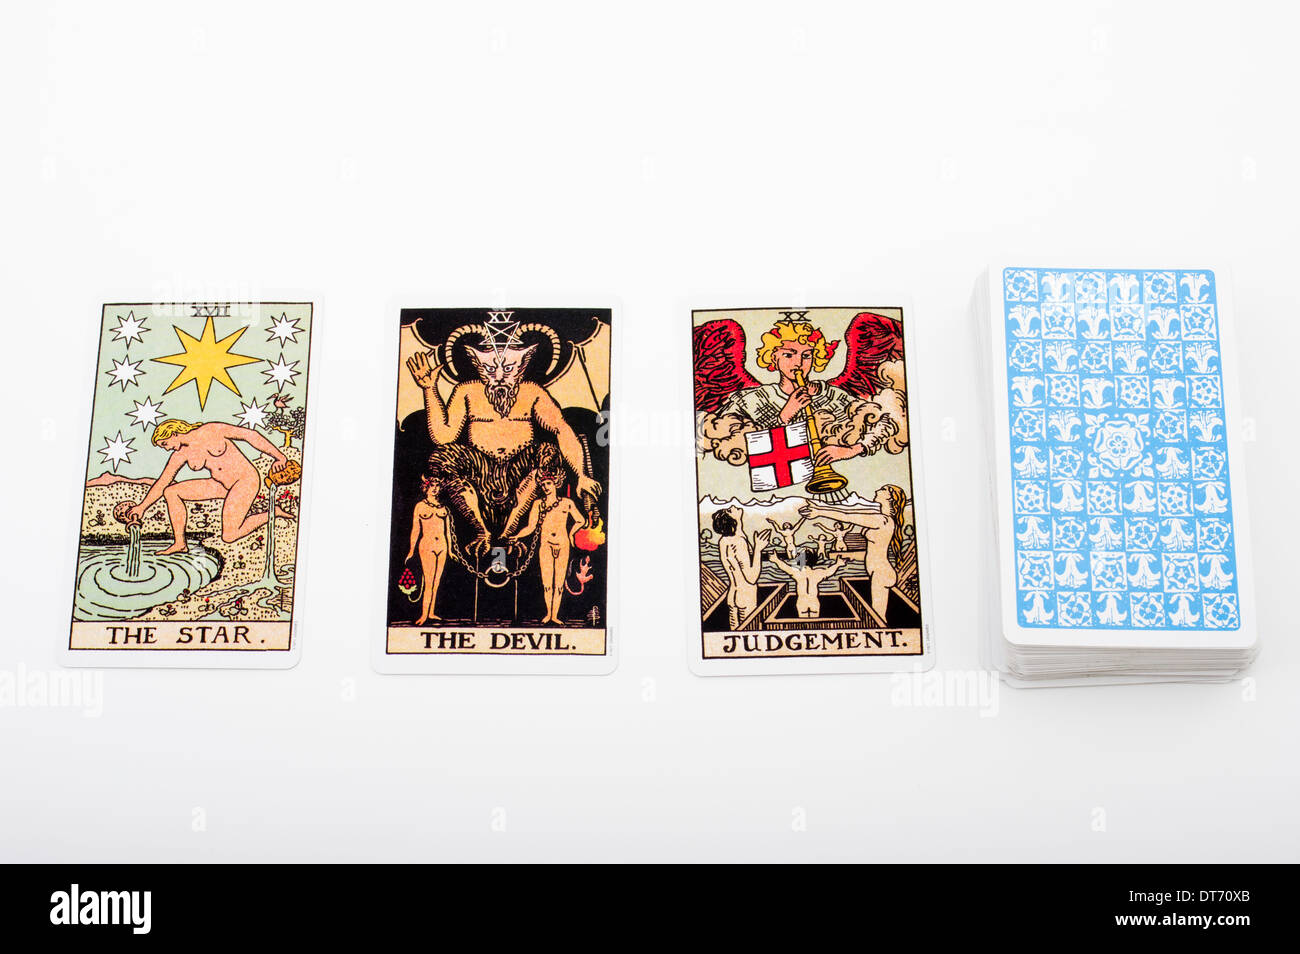 Tarot playing cards used by mystics, occultists for divination and fortune telling Stock Photo